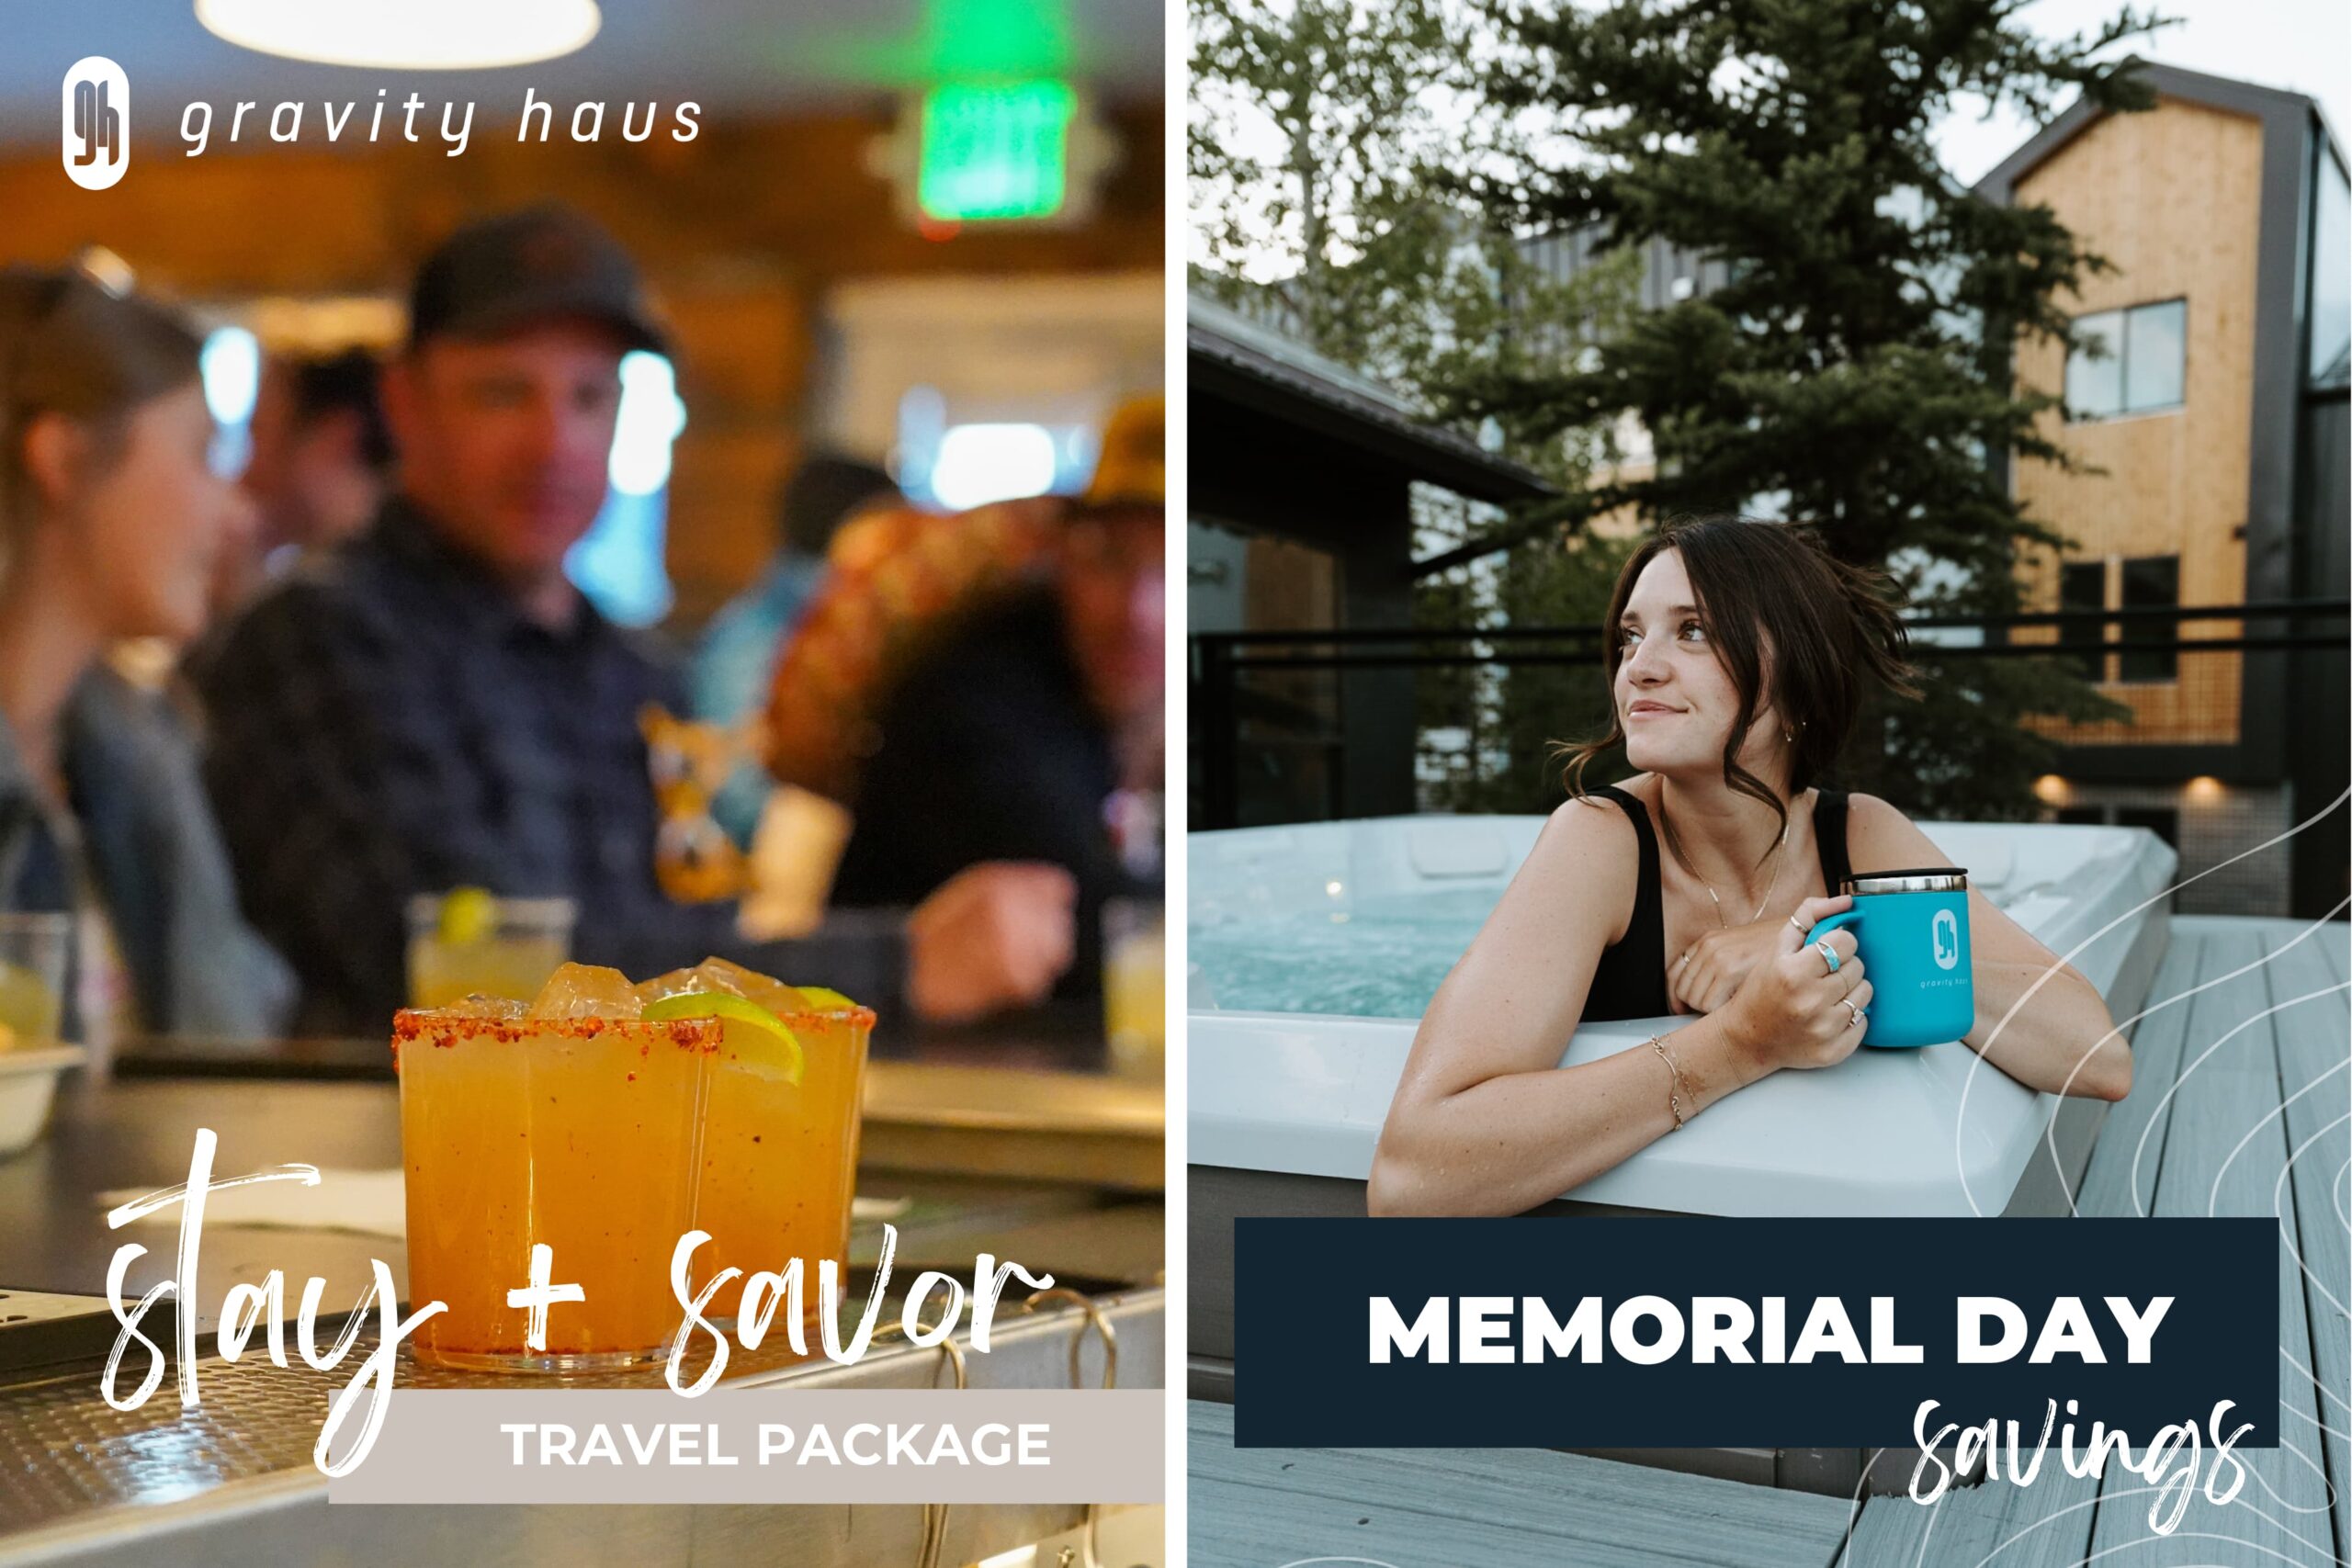 Gravity Haus Winter Park Stay + Savor and Memorial Day Promo